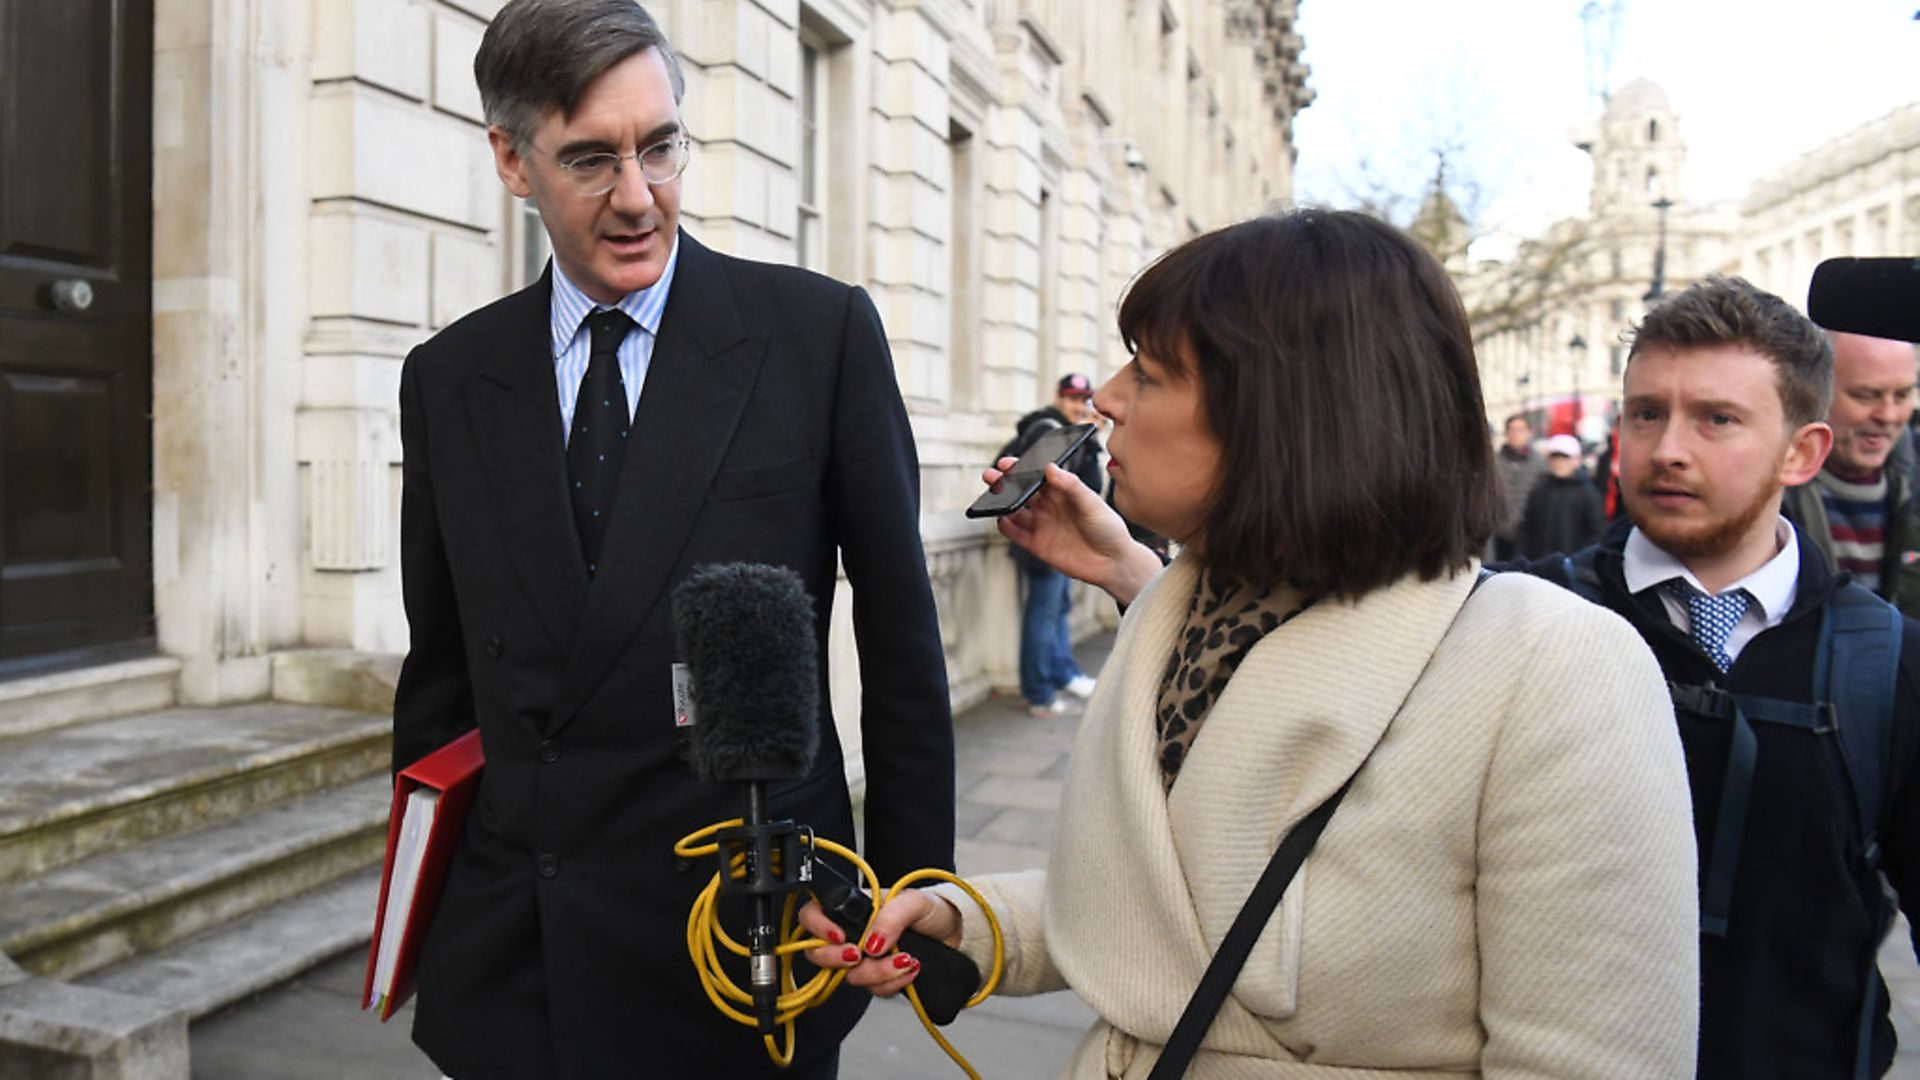 Jacob Rees-Mogg speaks to the media as he leaves the Cabinet Office in London. Photograph: Kirsty O'Connor/PA Wire. - Credit: PA